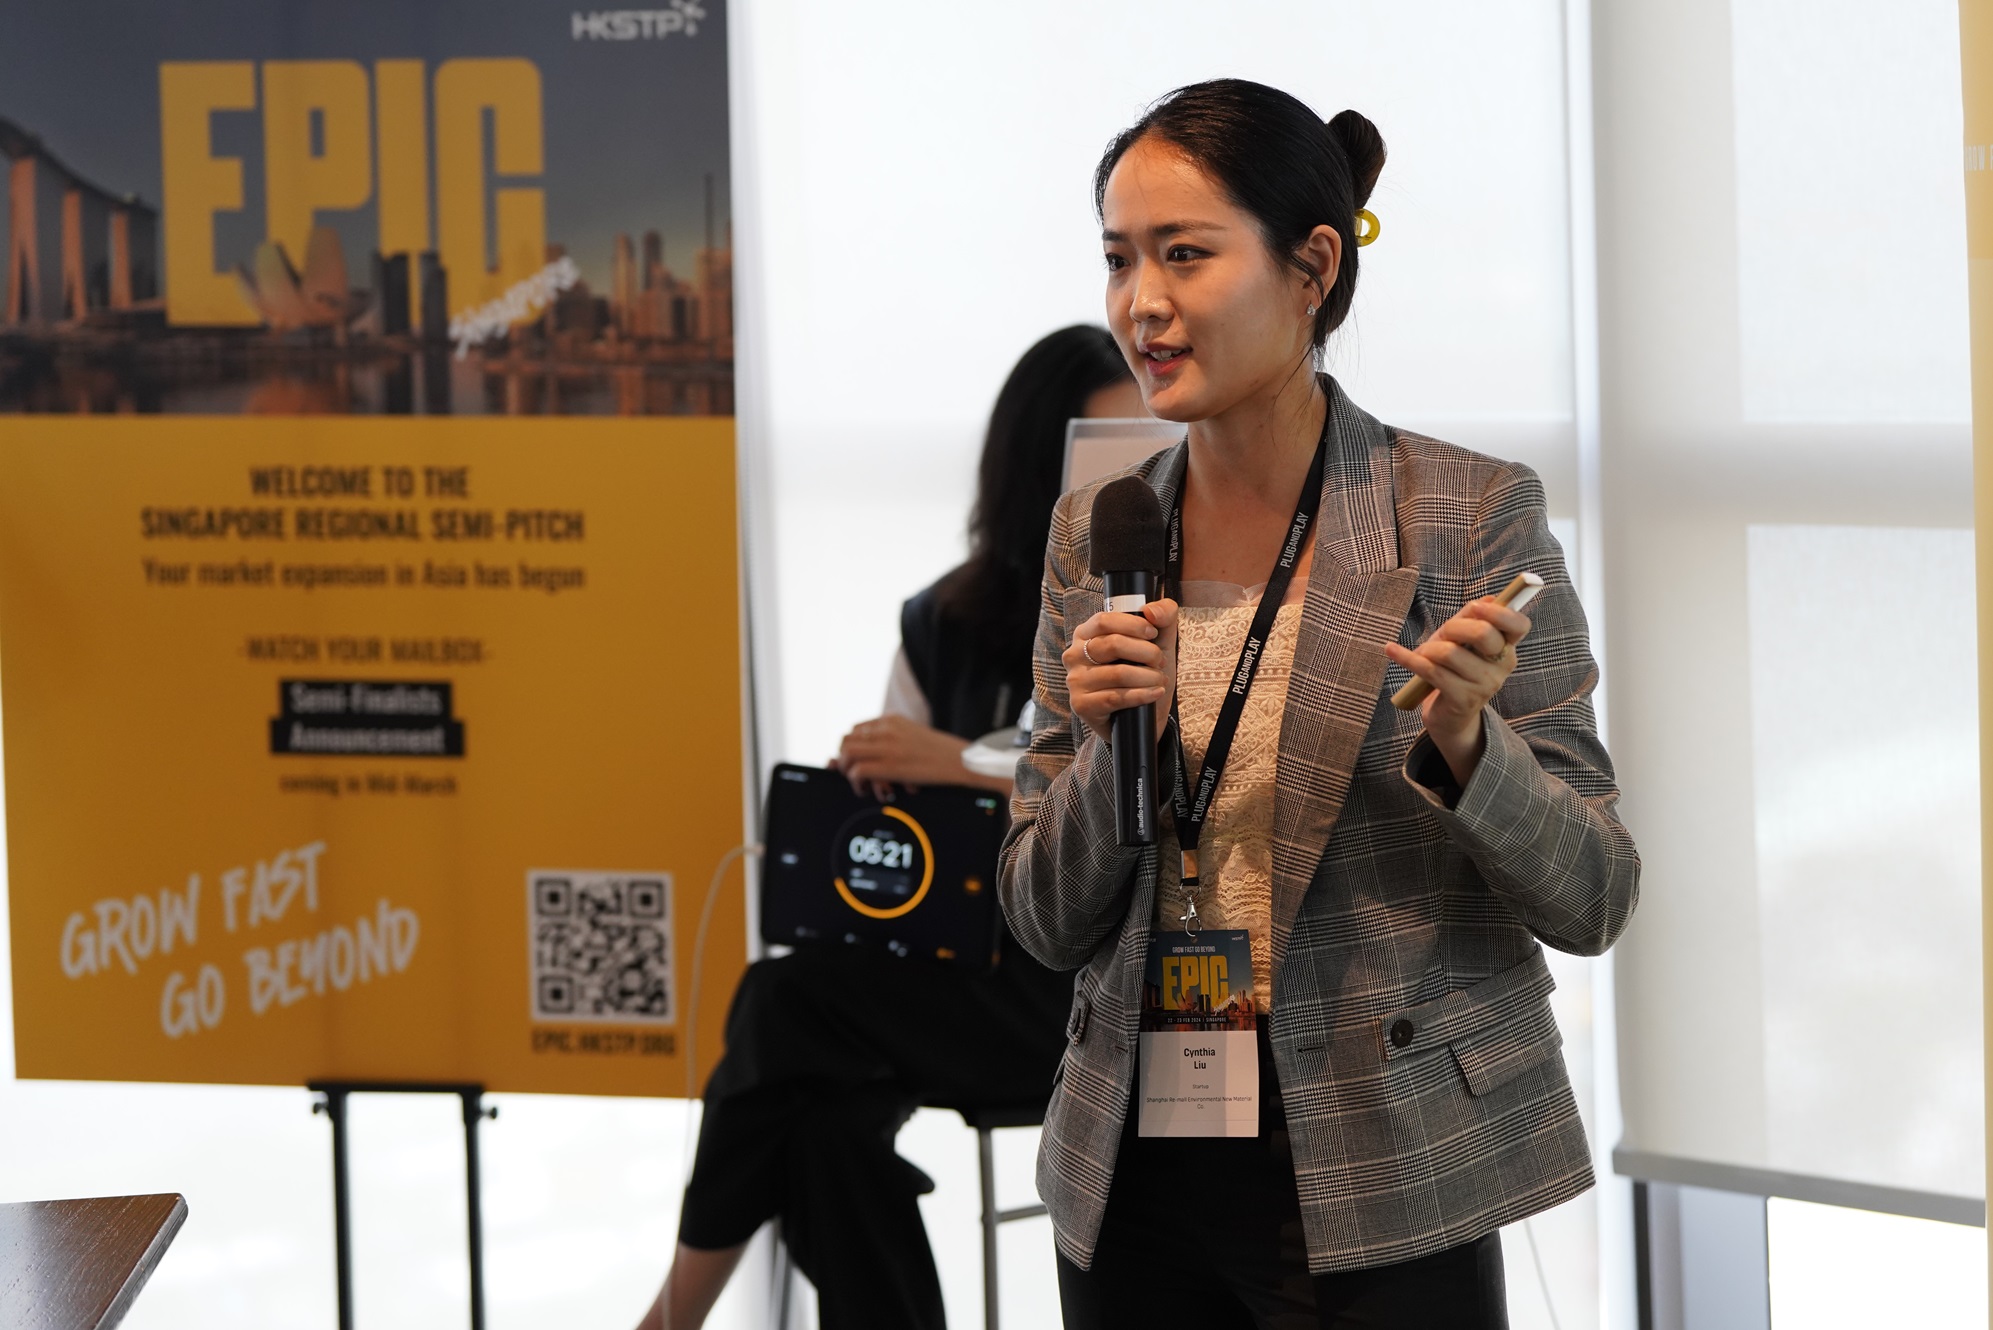 Photo 3-5: Featured startups showcased FinTech, PropTech and MobilityTech innovations on Day 1-2.